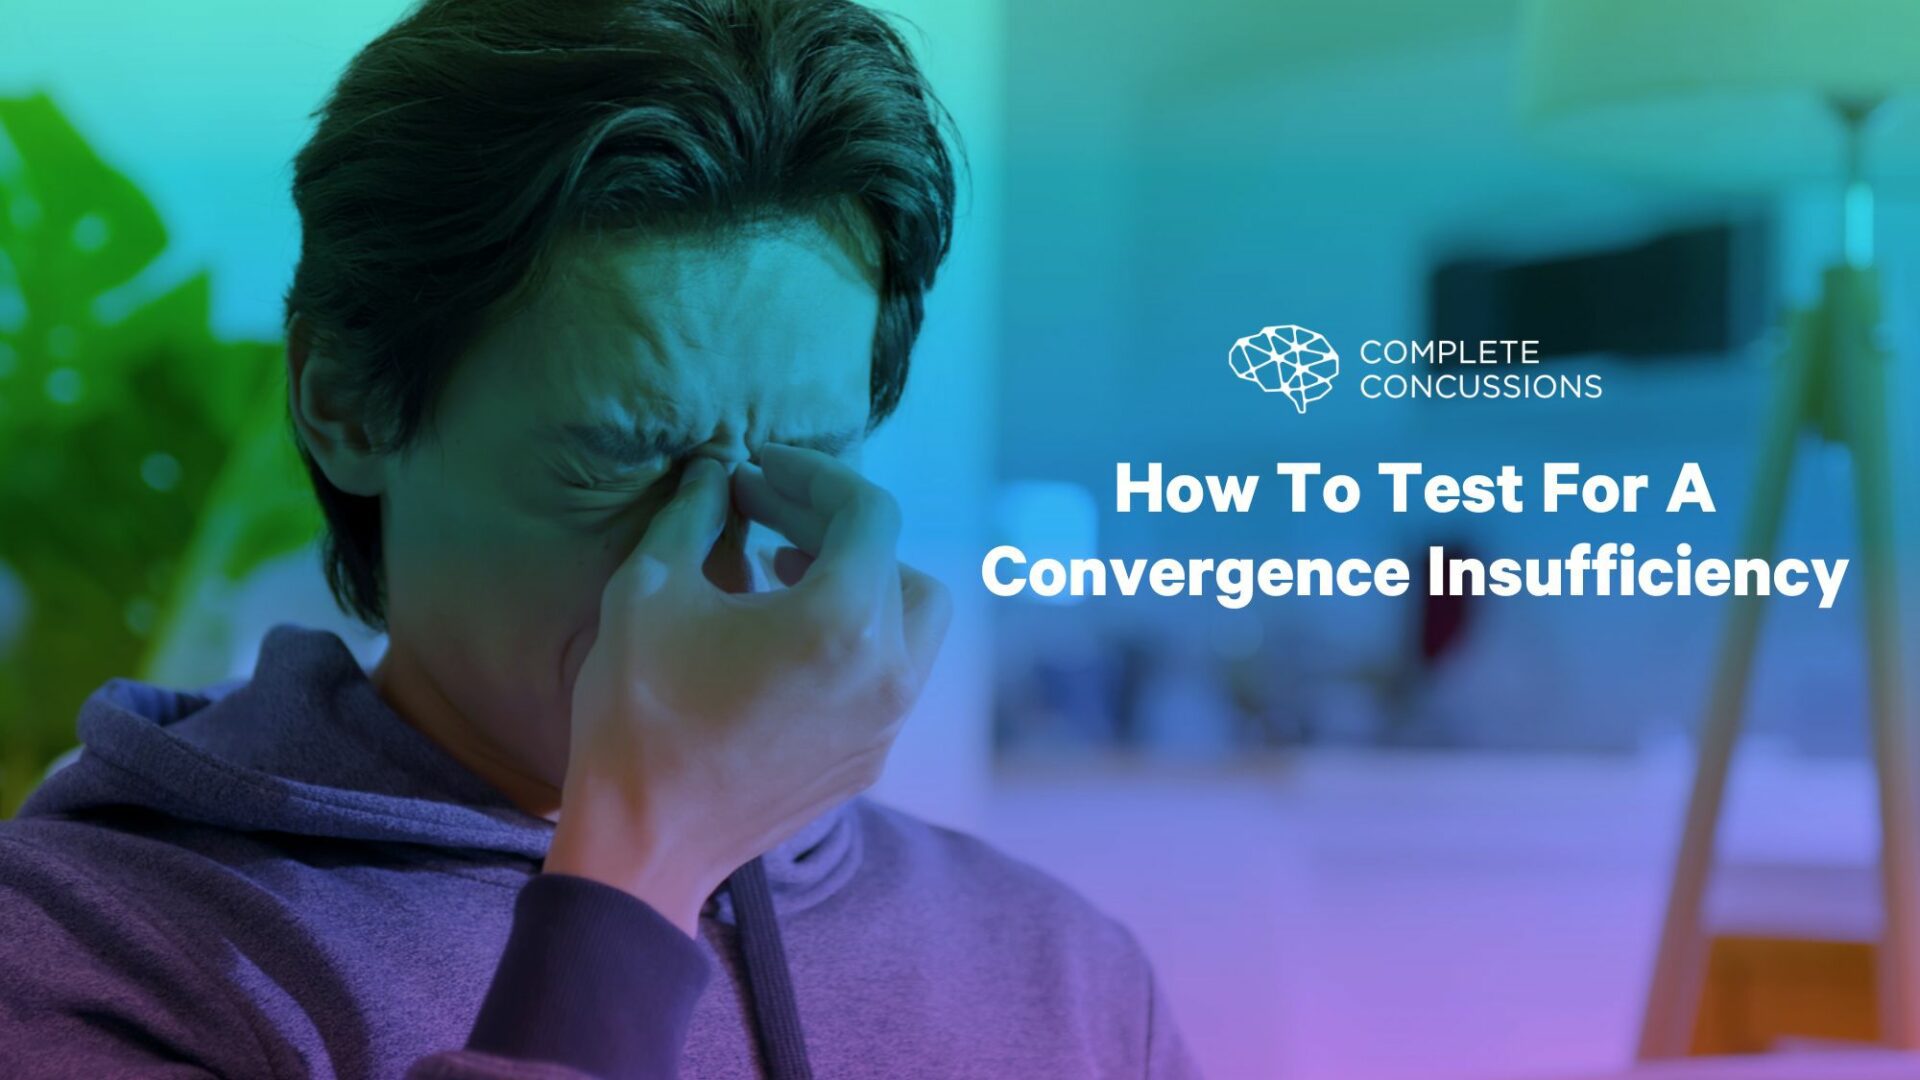 How To Test For A Convergence Insufficiency